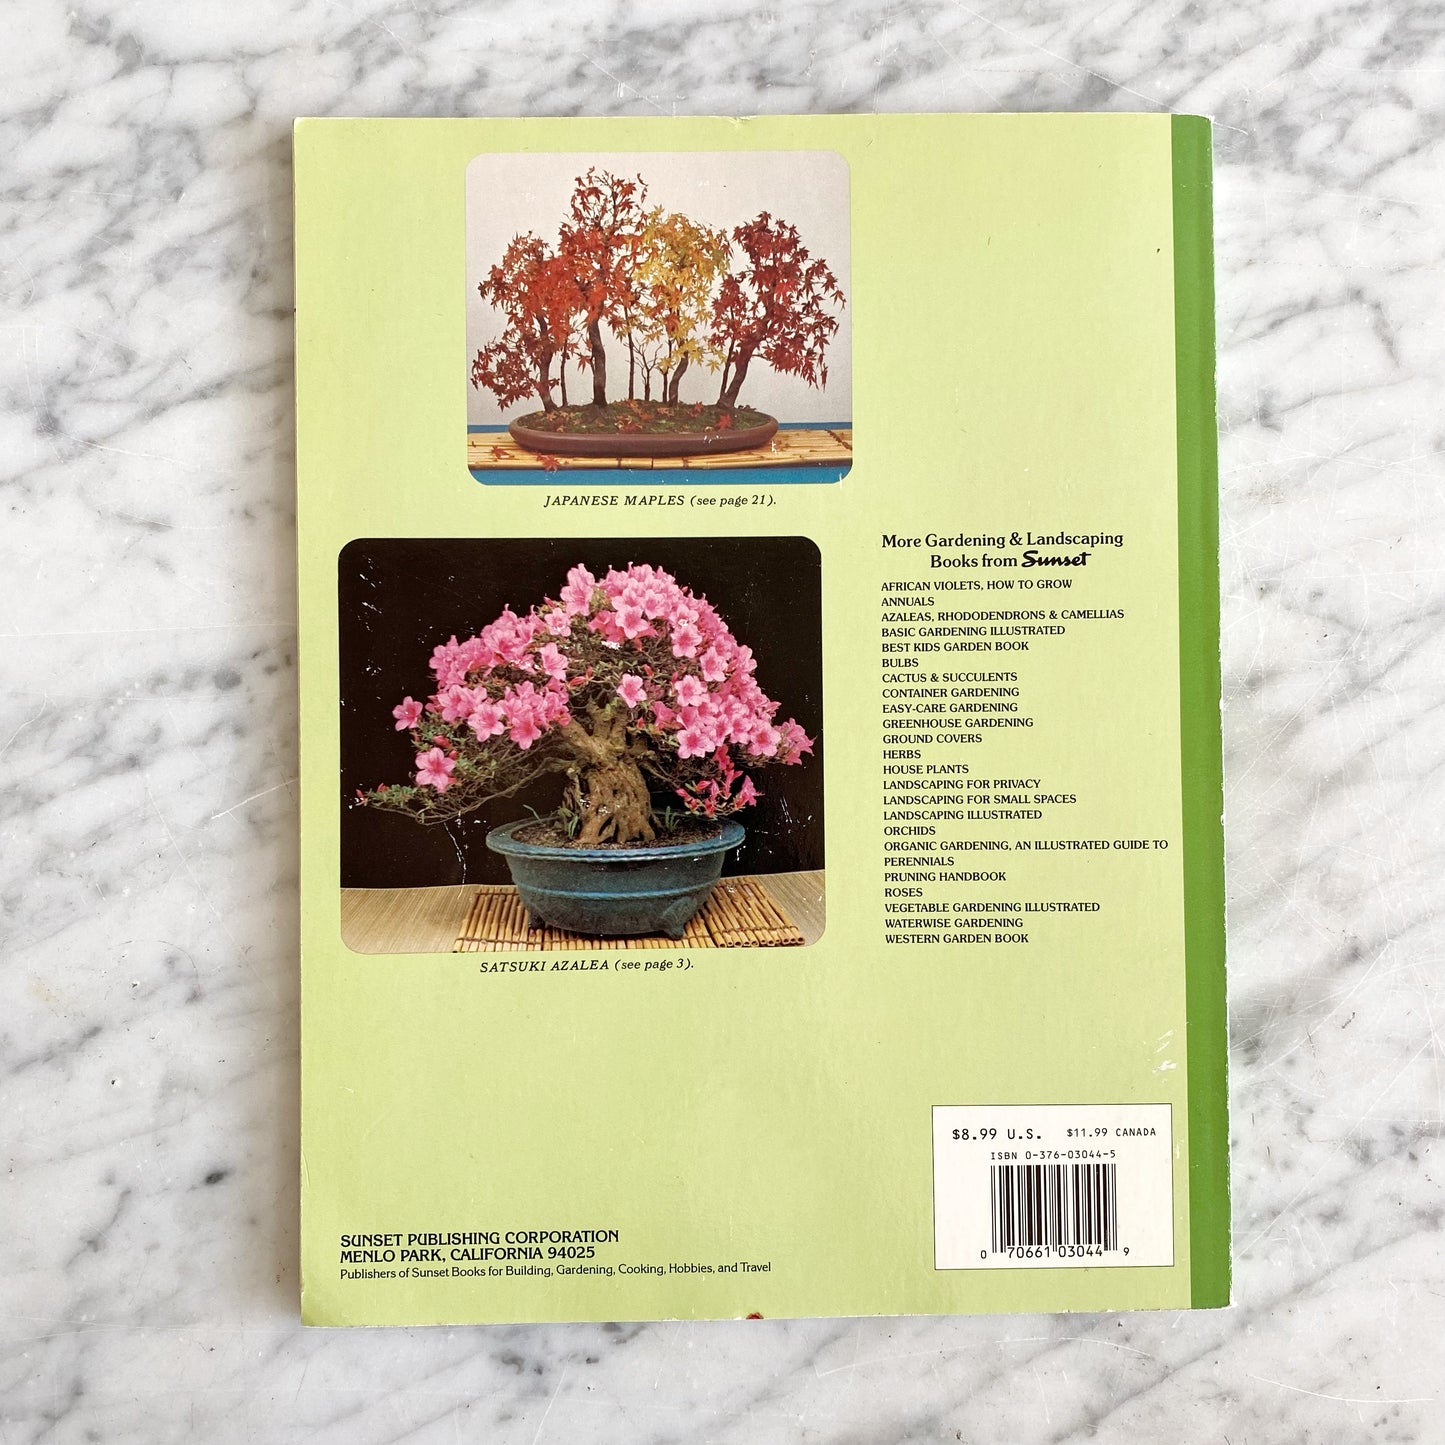 Book: Bonsai, An Illustrated Guide to the Ancient Art